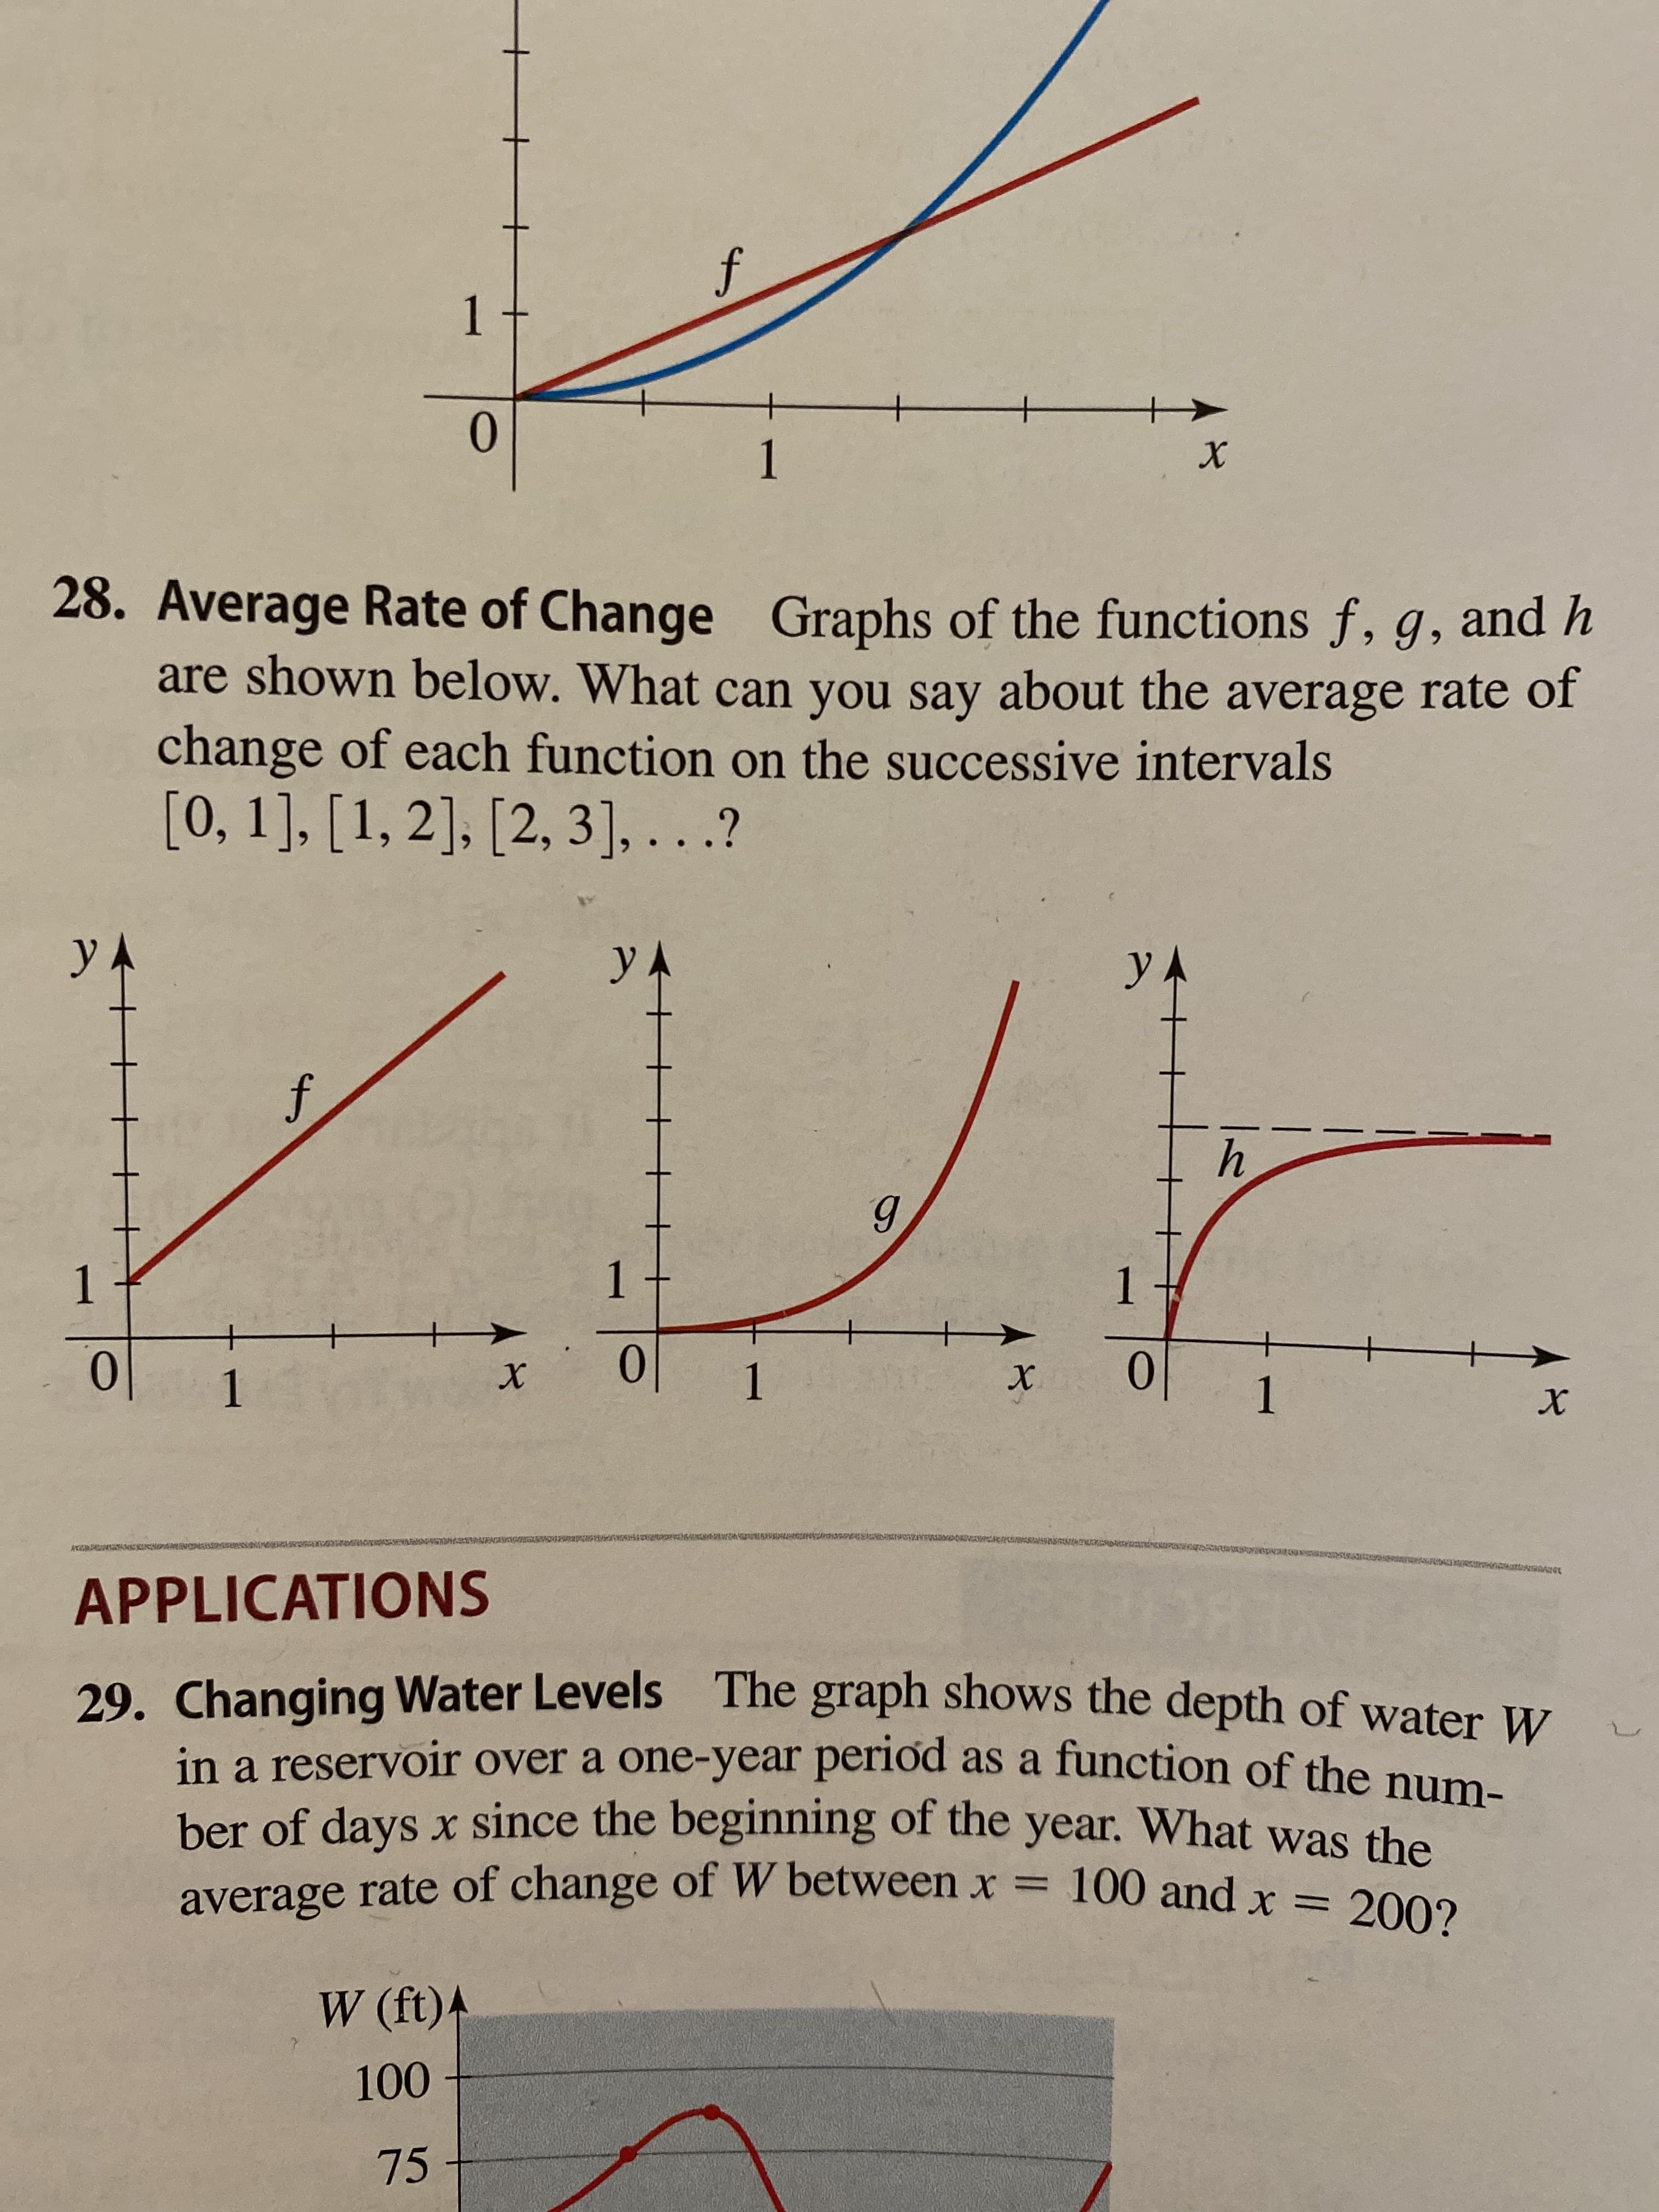 1 +
0.
1
28. Average Rate of Change
Graphs of the functions f, g, and h
are shown below. What can you say about the average rate of
change of each function on the successive intervals
[0, 1], [1, 2], [2, 3], ...?
y A
y A
6.
1
1 +
1
0.
0.
1
1
1
इख2 840
APPLICATIONS
29. Changing Water Levels The graph shows the depth of water W
in a reservoir over a one-year period as a function of the num-
ber of days x since the beginning of the year. What was the
average rate of change of W between x = 100 and x = 200?
W (ft)A
100
75
